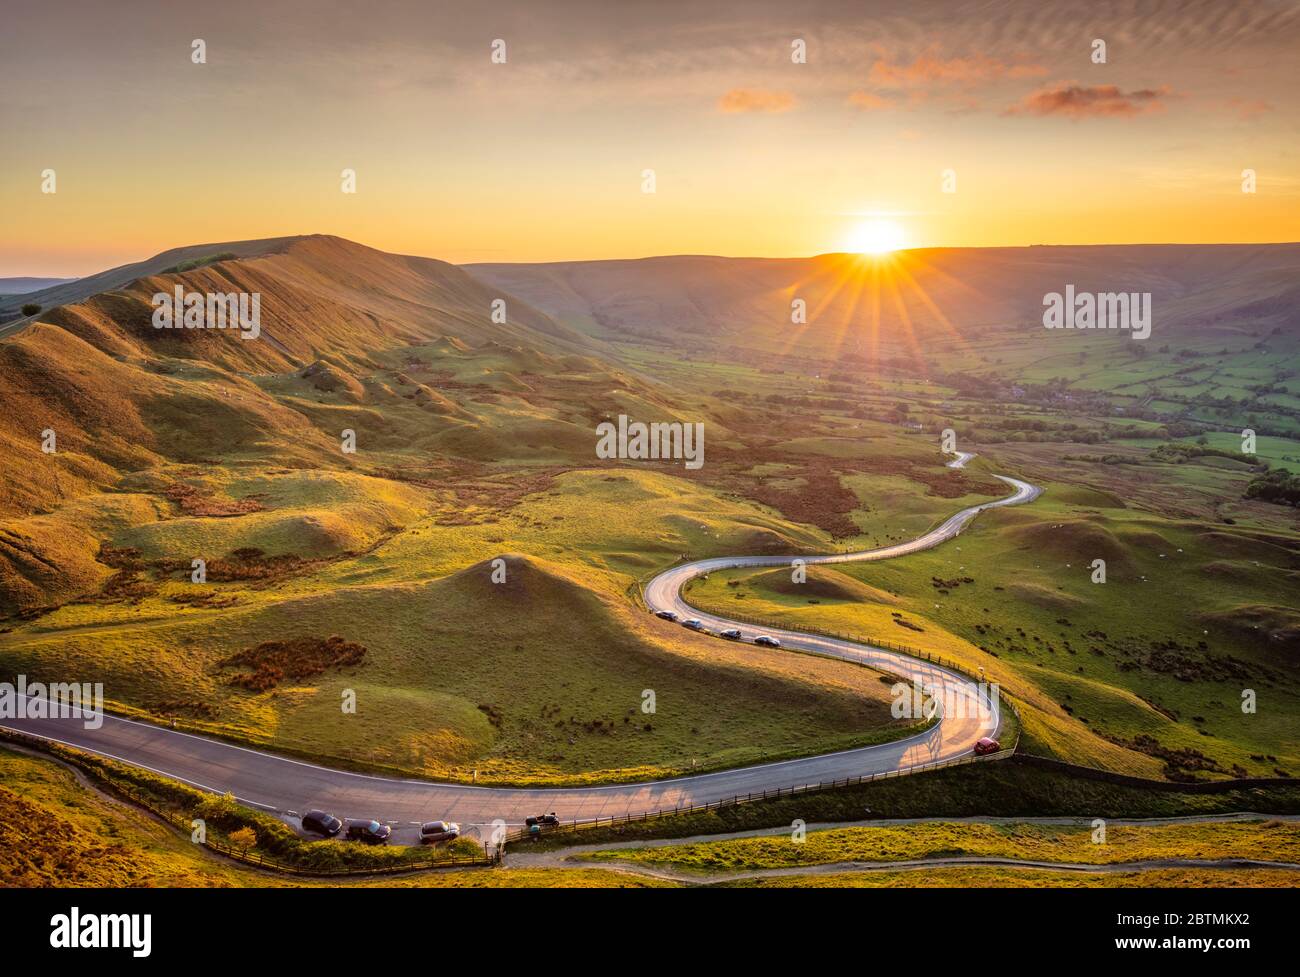 Sunset Rushup Edge Barber Booths Derbyshire Peak District Narrow winding road from Mam tor to Edale Derbyshire Peak District England UK GB Europe Stock Photo